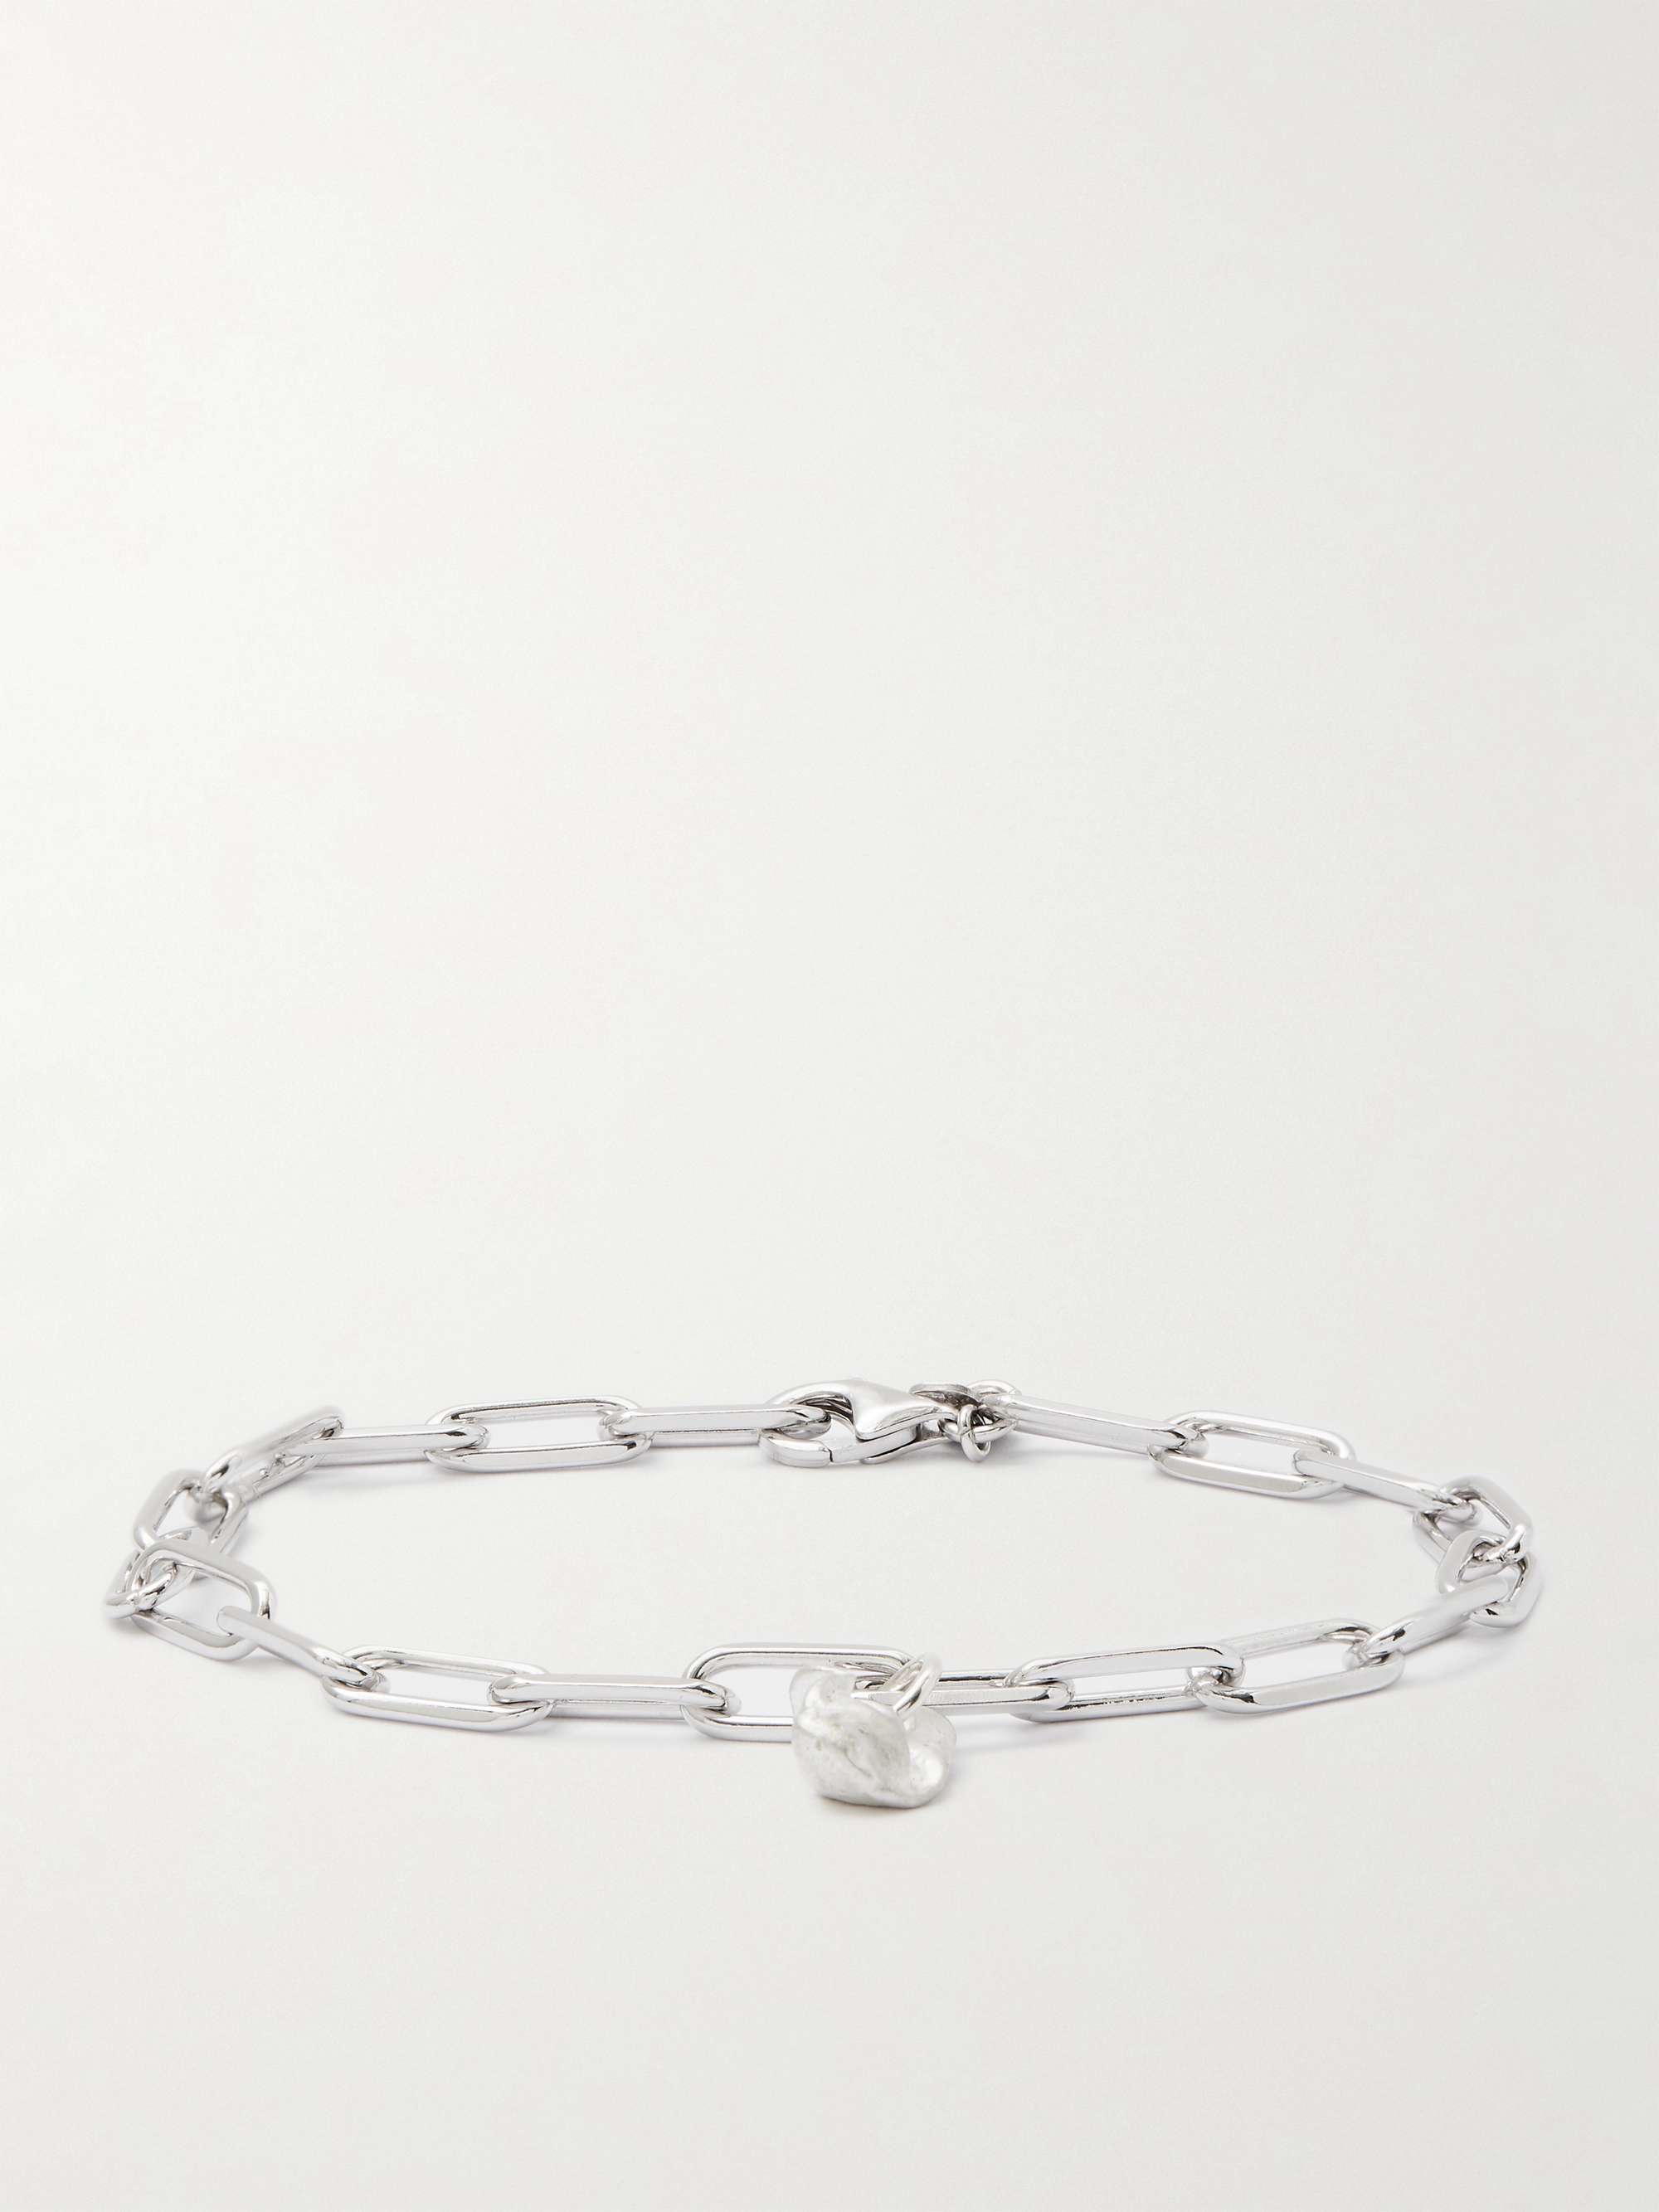 ALICE MADE THIS Bardo Large Rhodium-Plated Sterling Silver Chain Bracelet